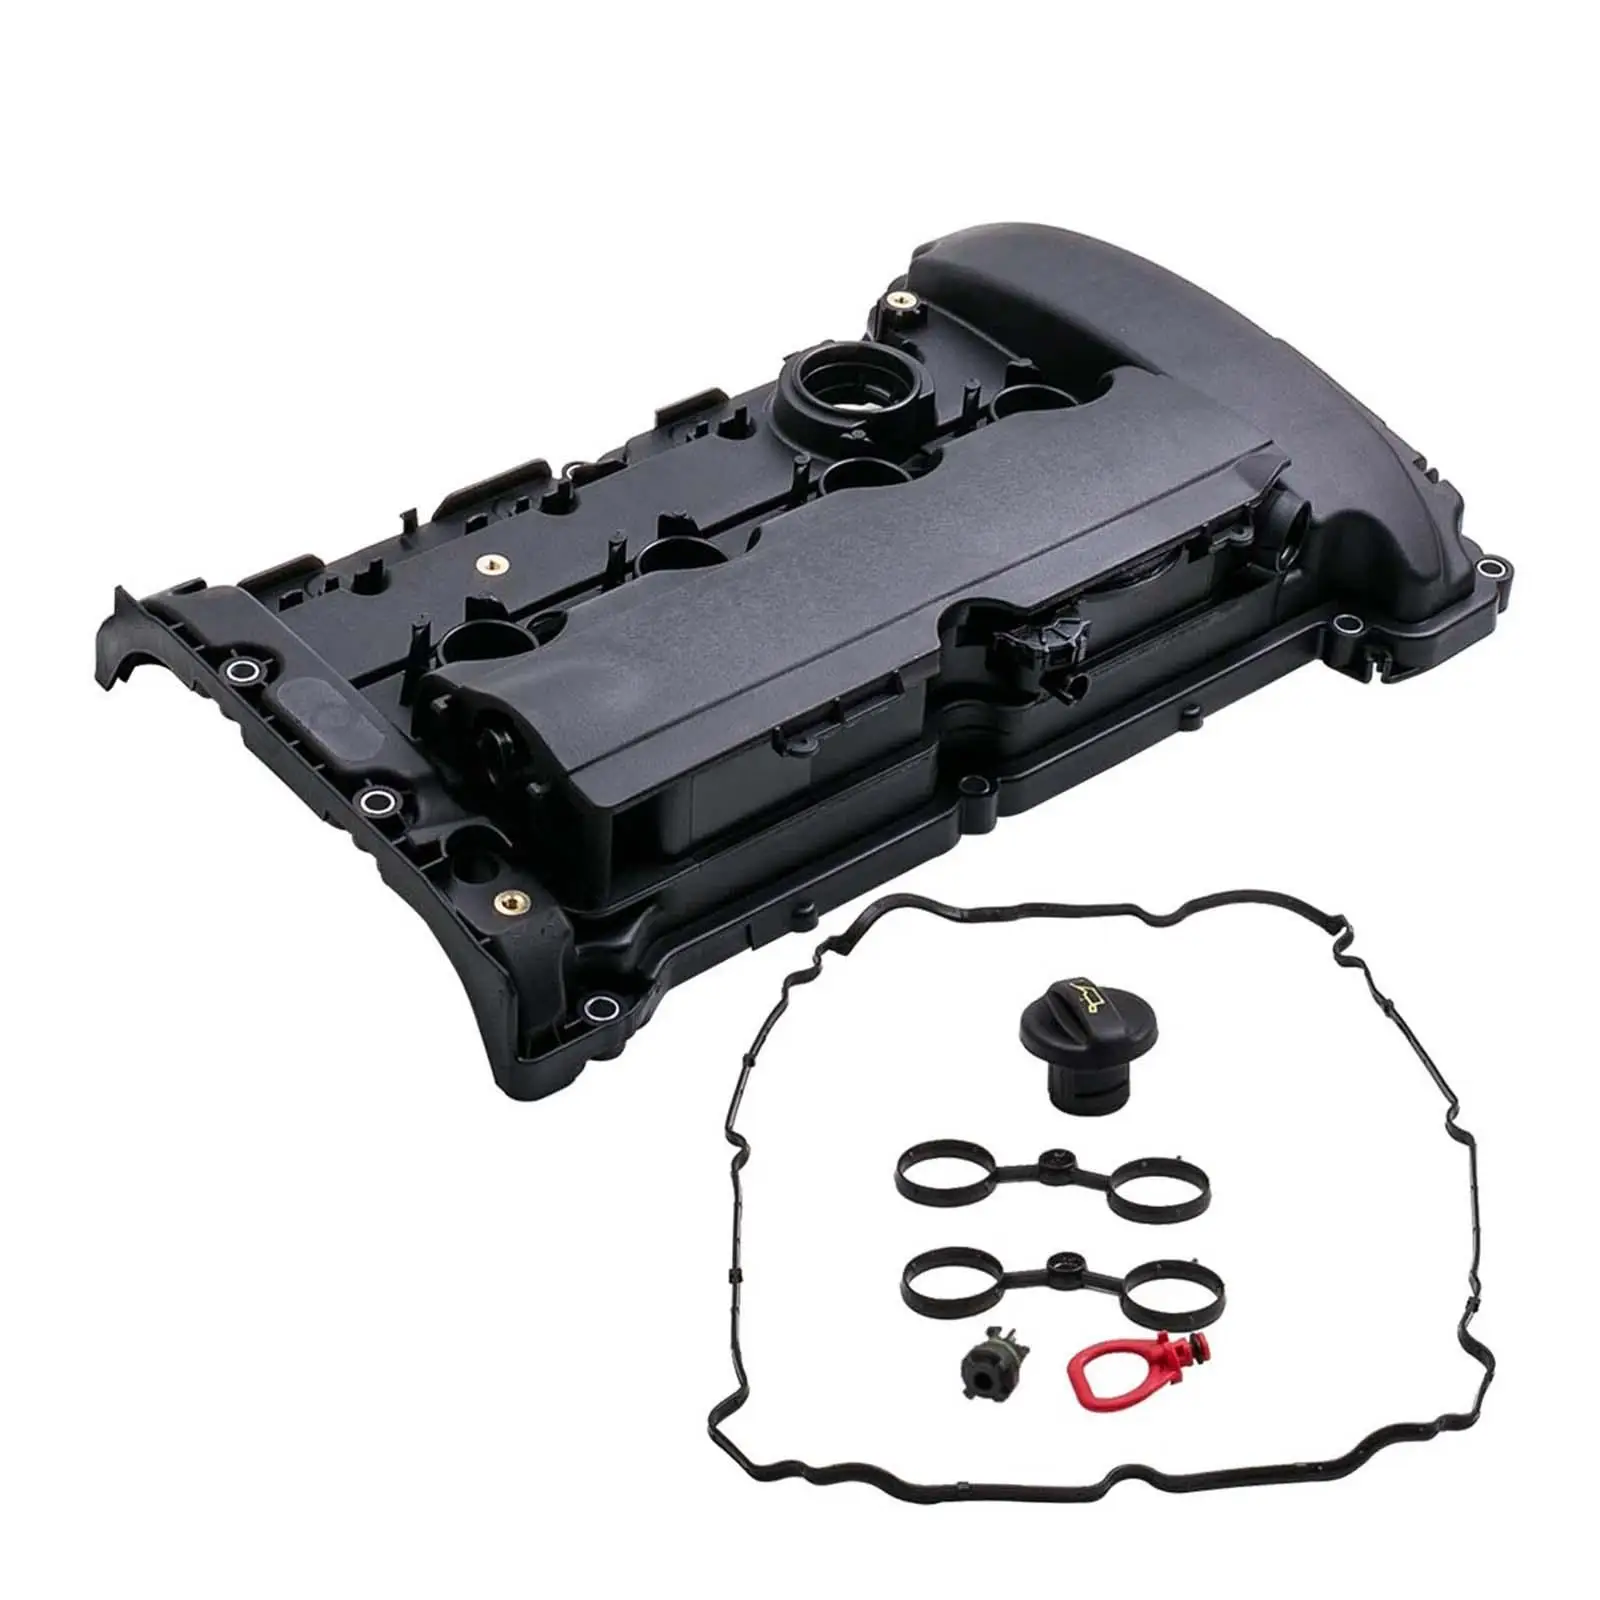 

Durable Engine Cylinder Head Valve Cover Gasket High Performance 11127646555 for Mini Cooper S Jcw 1.6L Repair Accessory